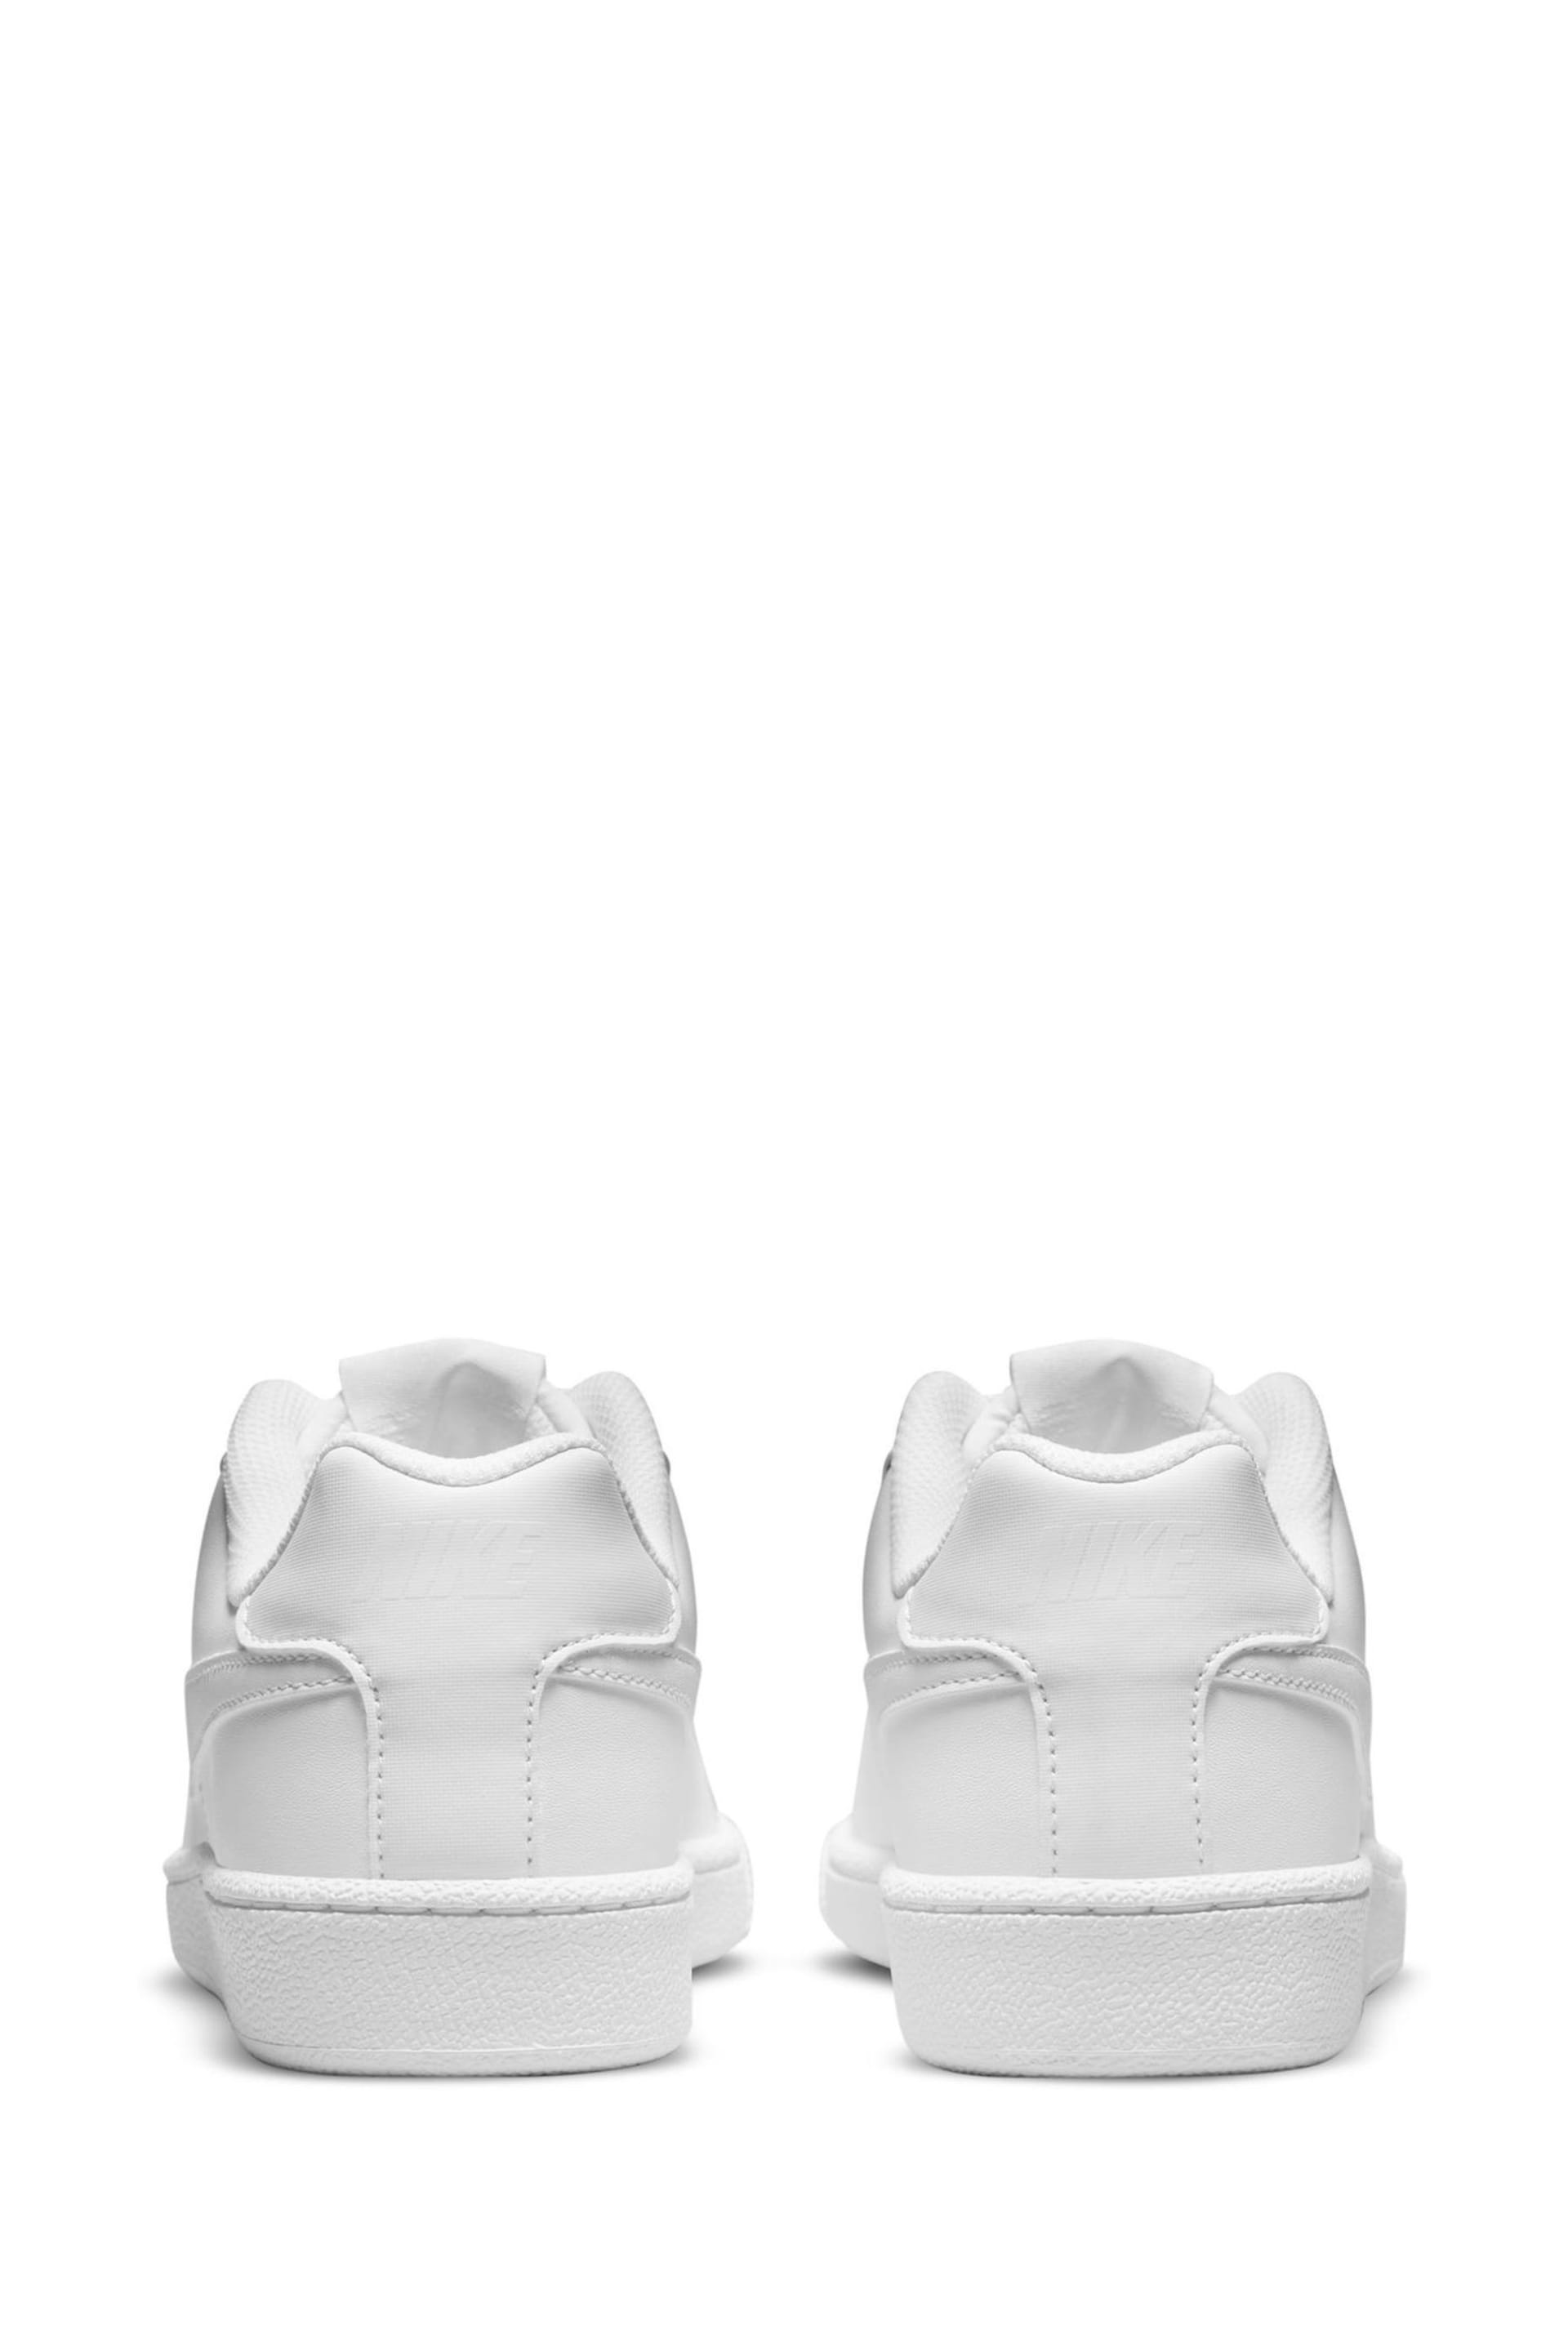 Nike White Court Royale Trainers - Image 5 of 7